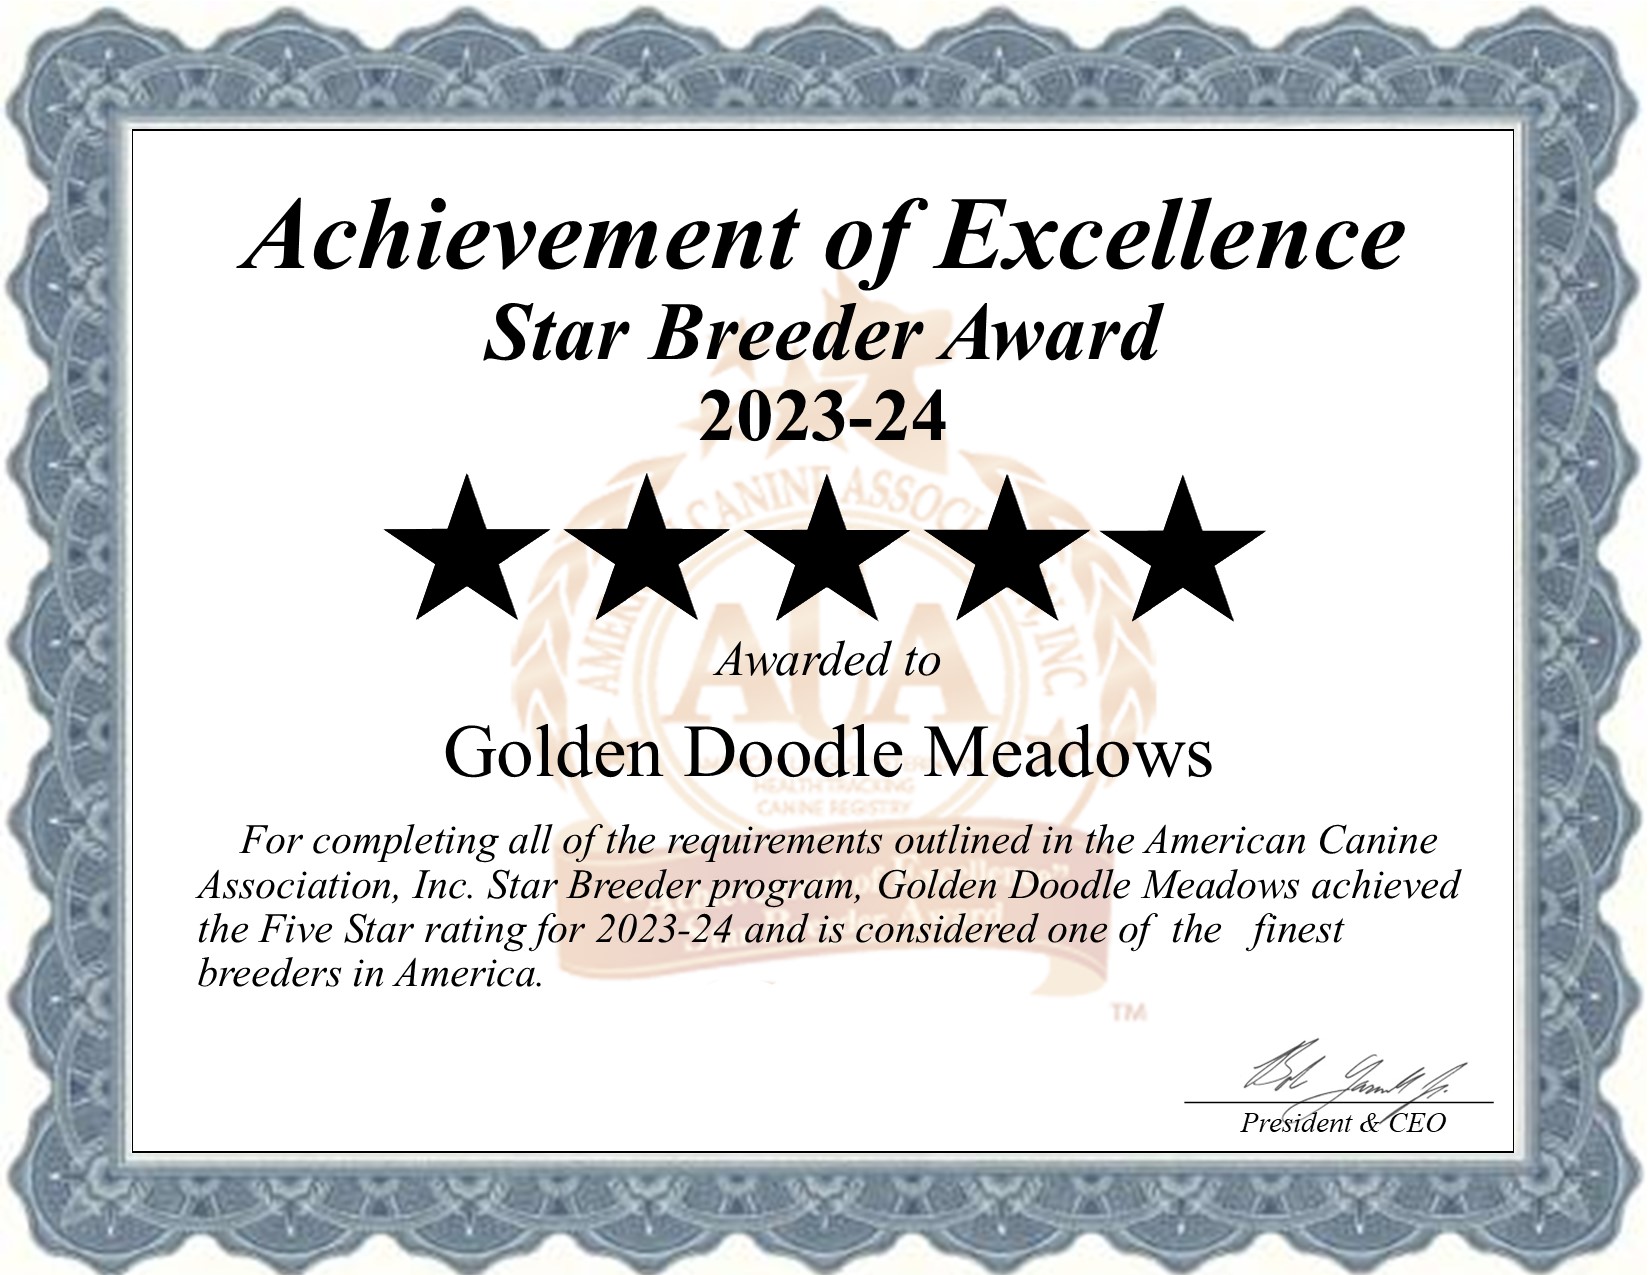 Golden Doodle, Acres, dog, breeder, star, certificate, Golden Doodle-Acres, Dundee, NY, New York, puppy, dog, kennels, mill, puppymill, usda, 5-star, aca, ica, registered, Goldendoodle, none